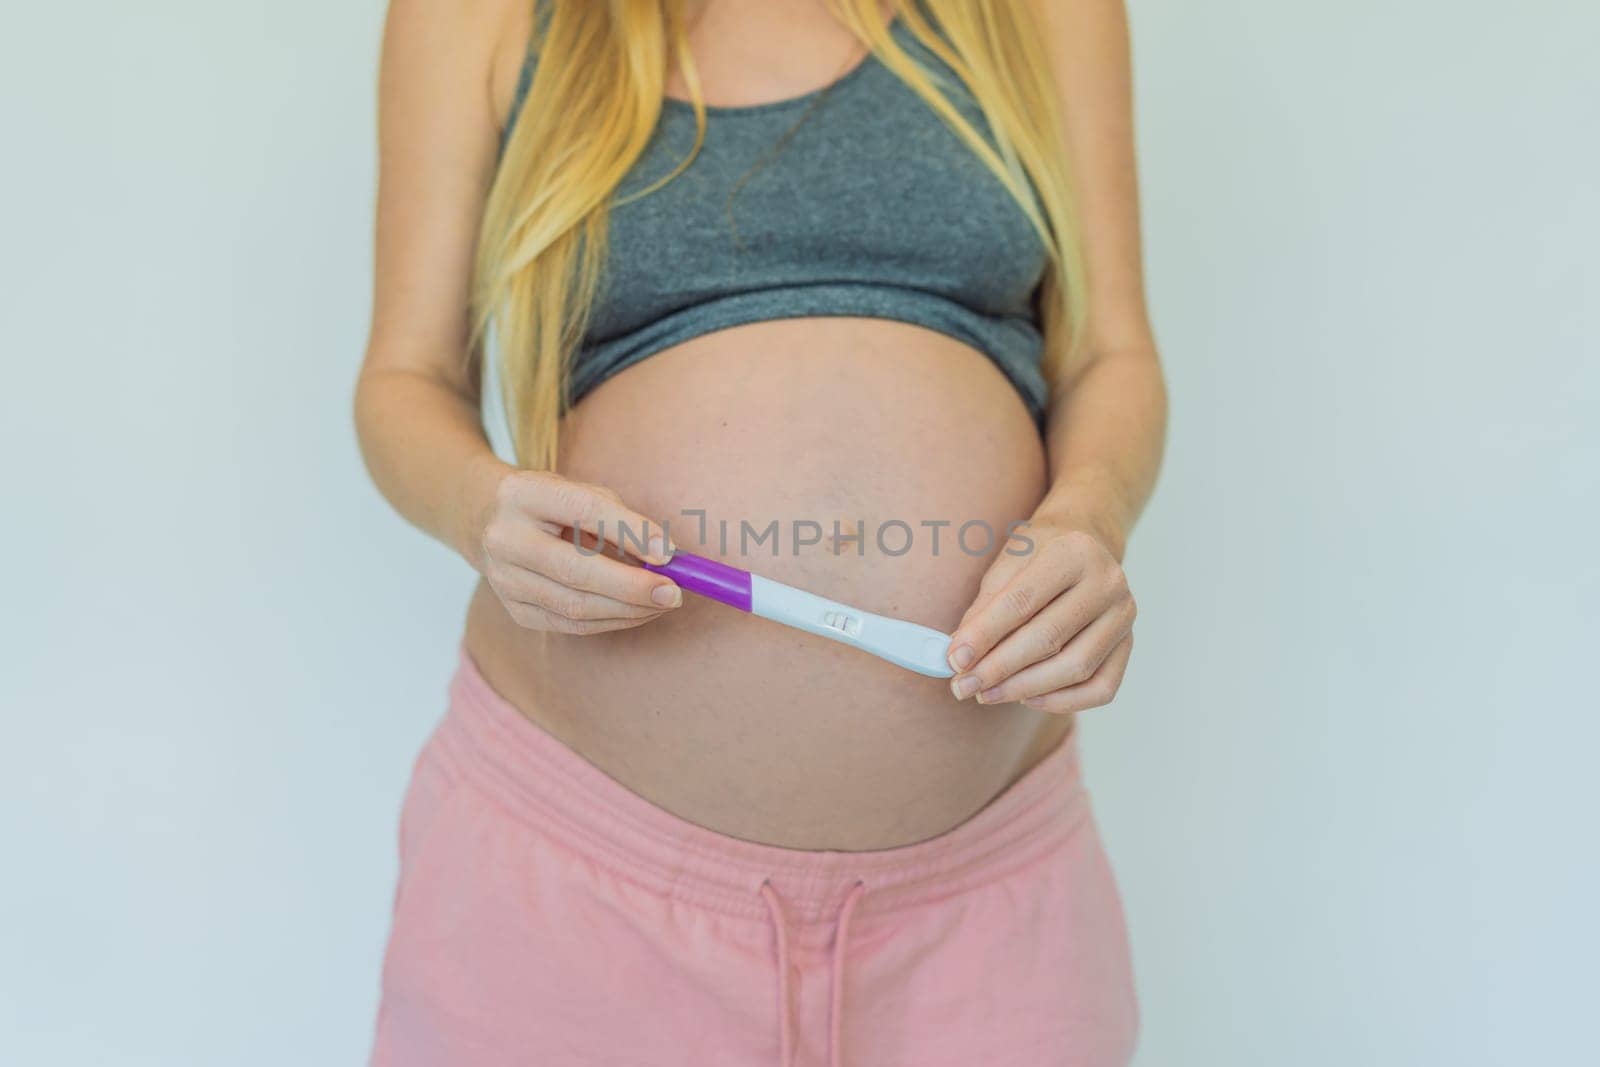 Joyful pregnant woman shares the exciting news, proudly displaying her positive pregnancy test and a heartwarming ultrasound photo by galitskaya